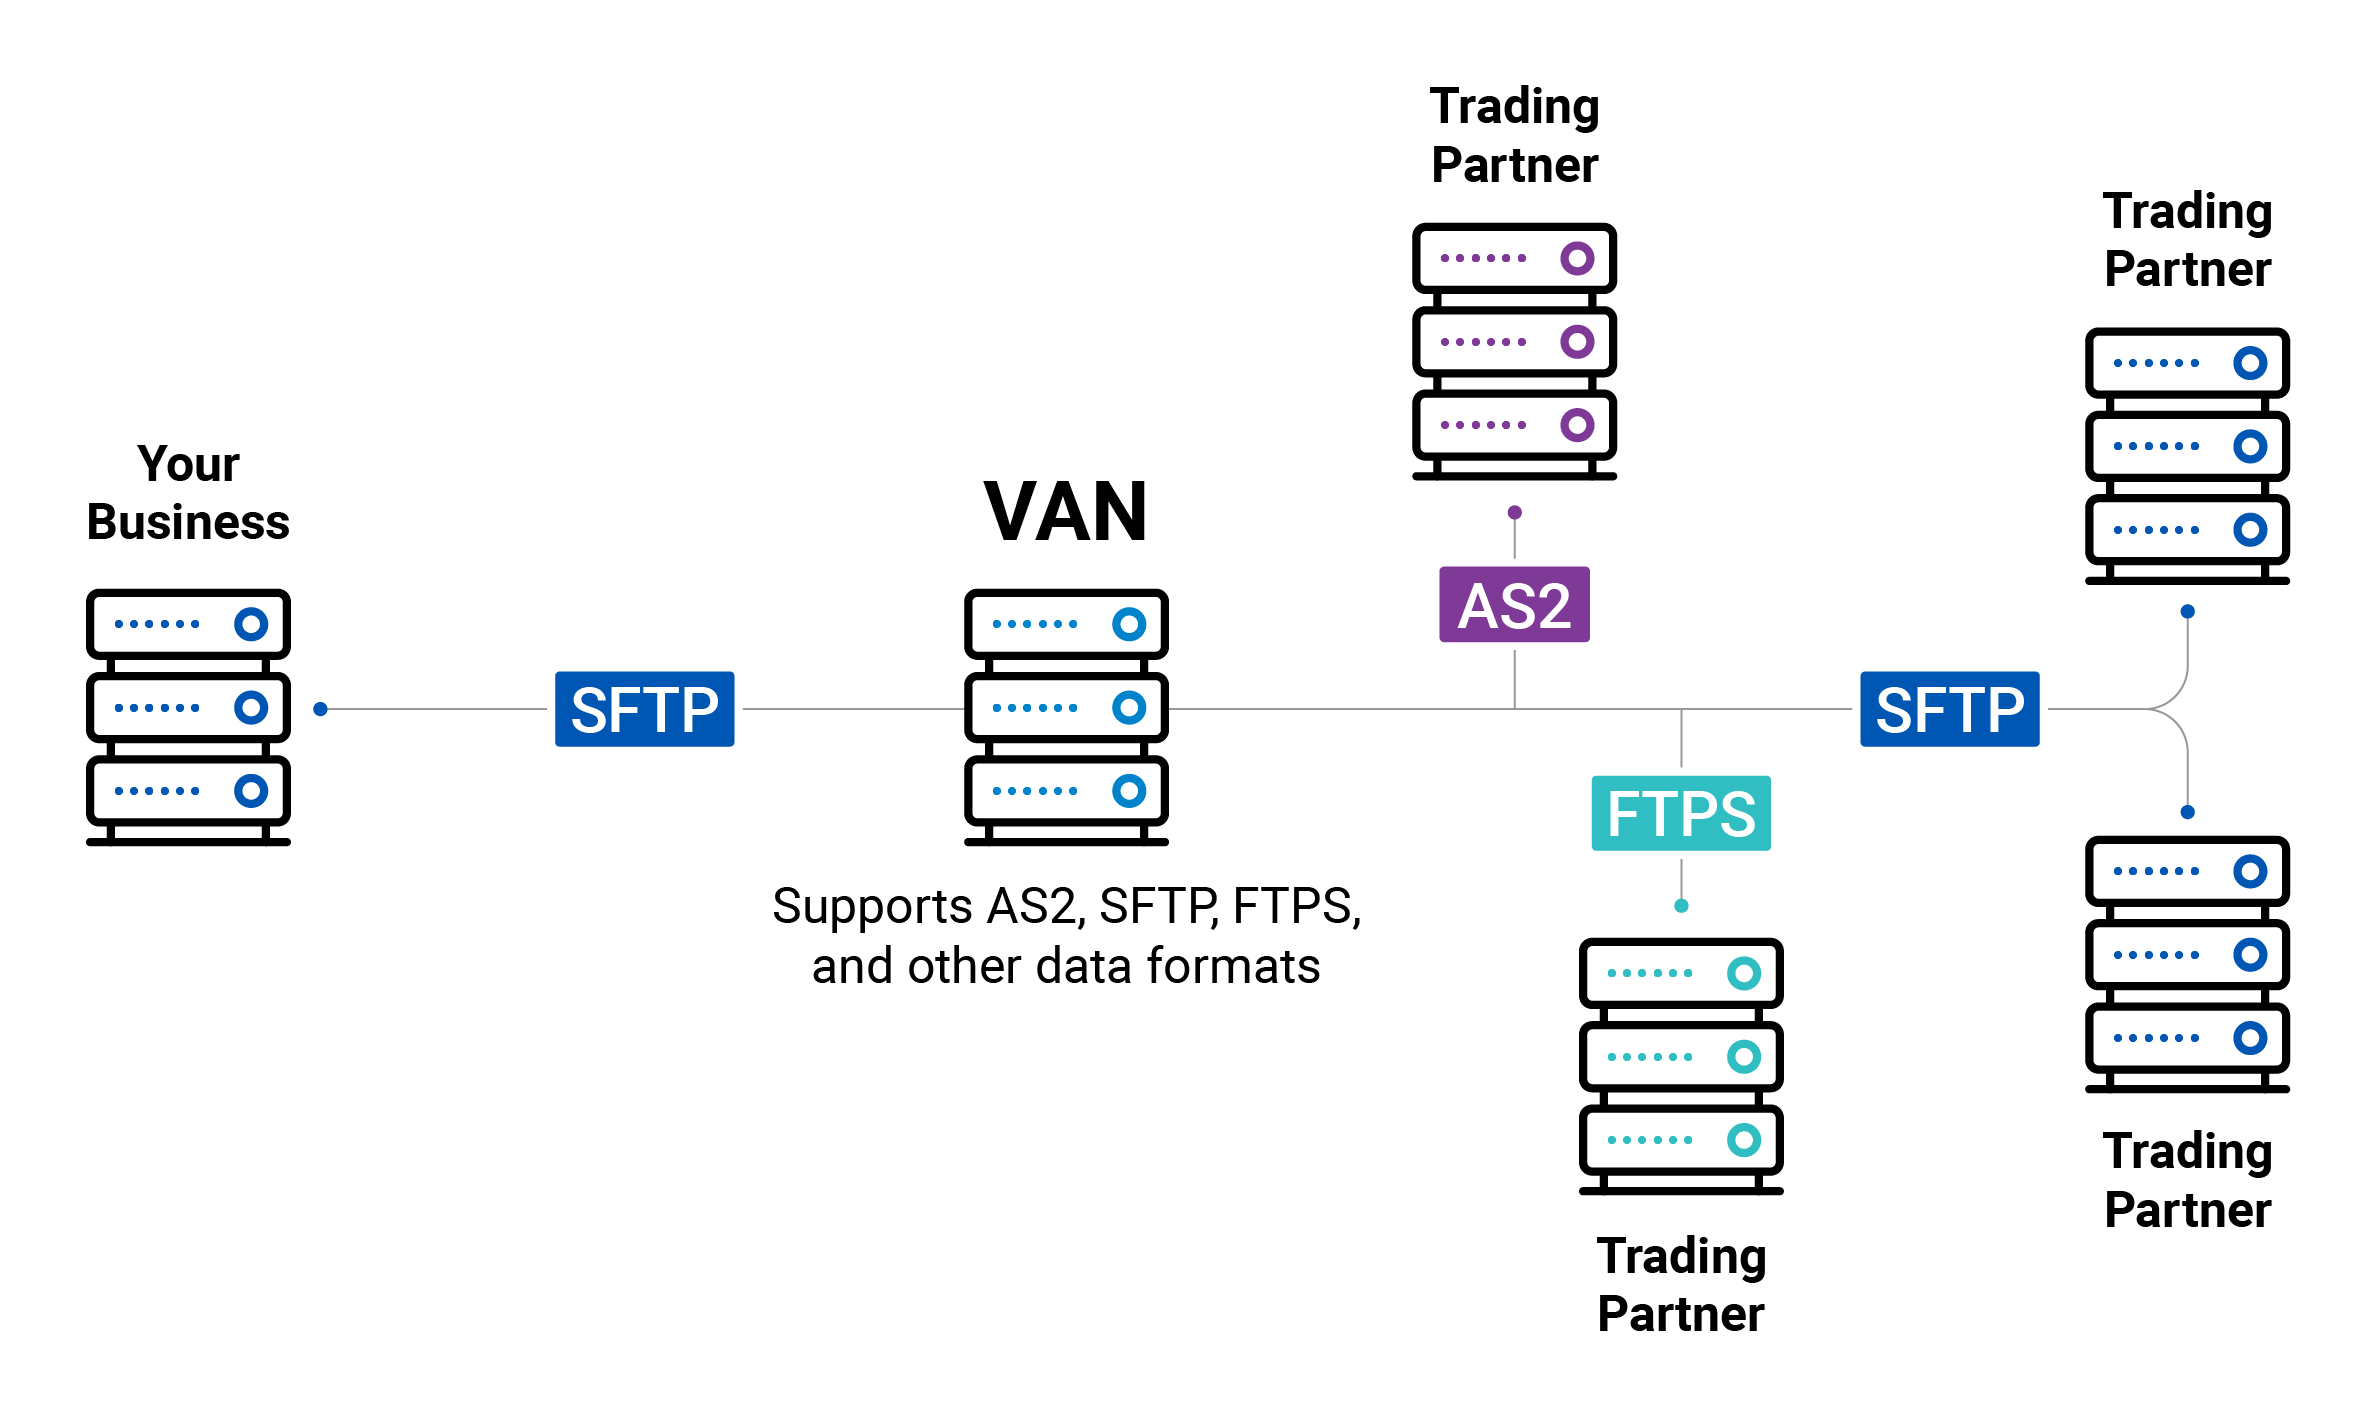 Single Connection to through an EDI VAN to multiple trading partners